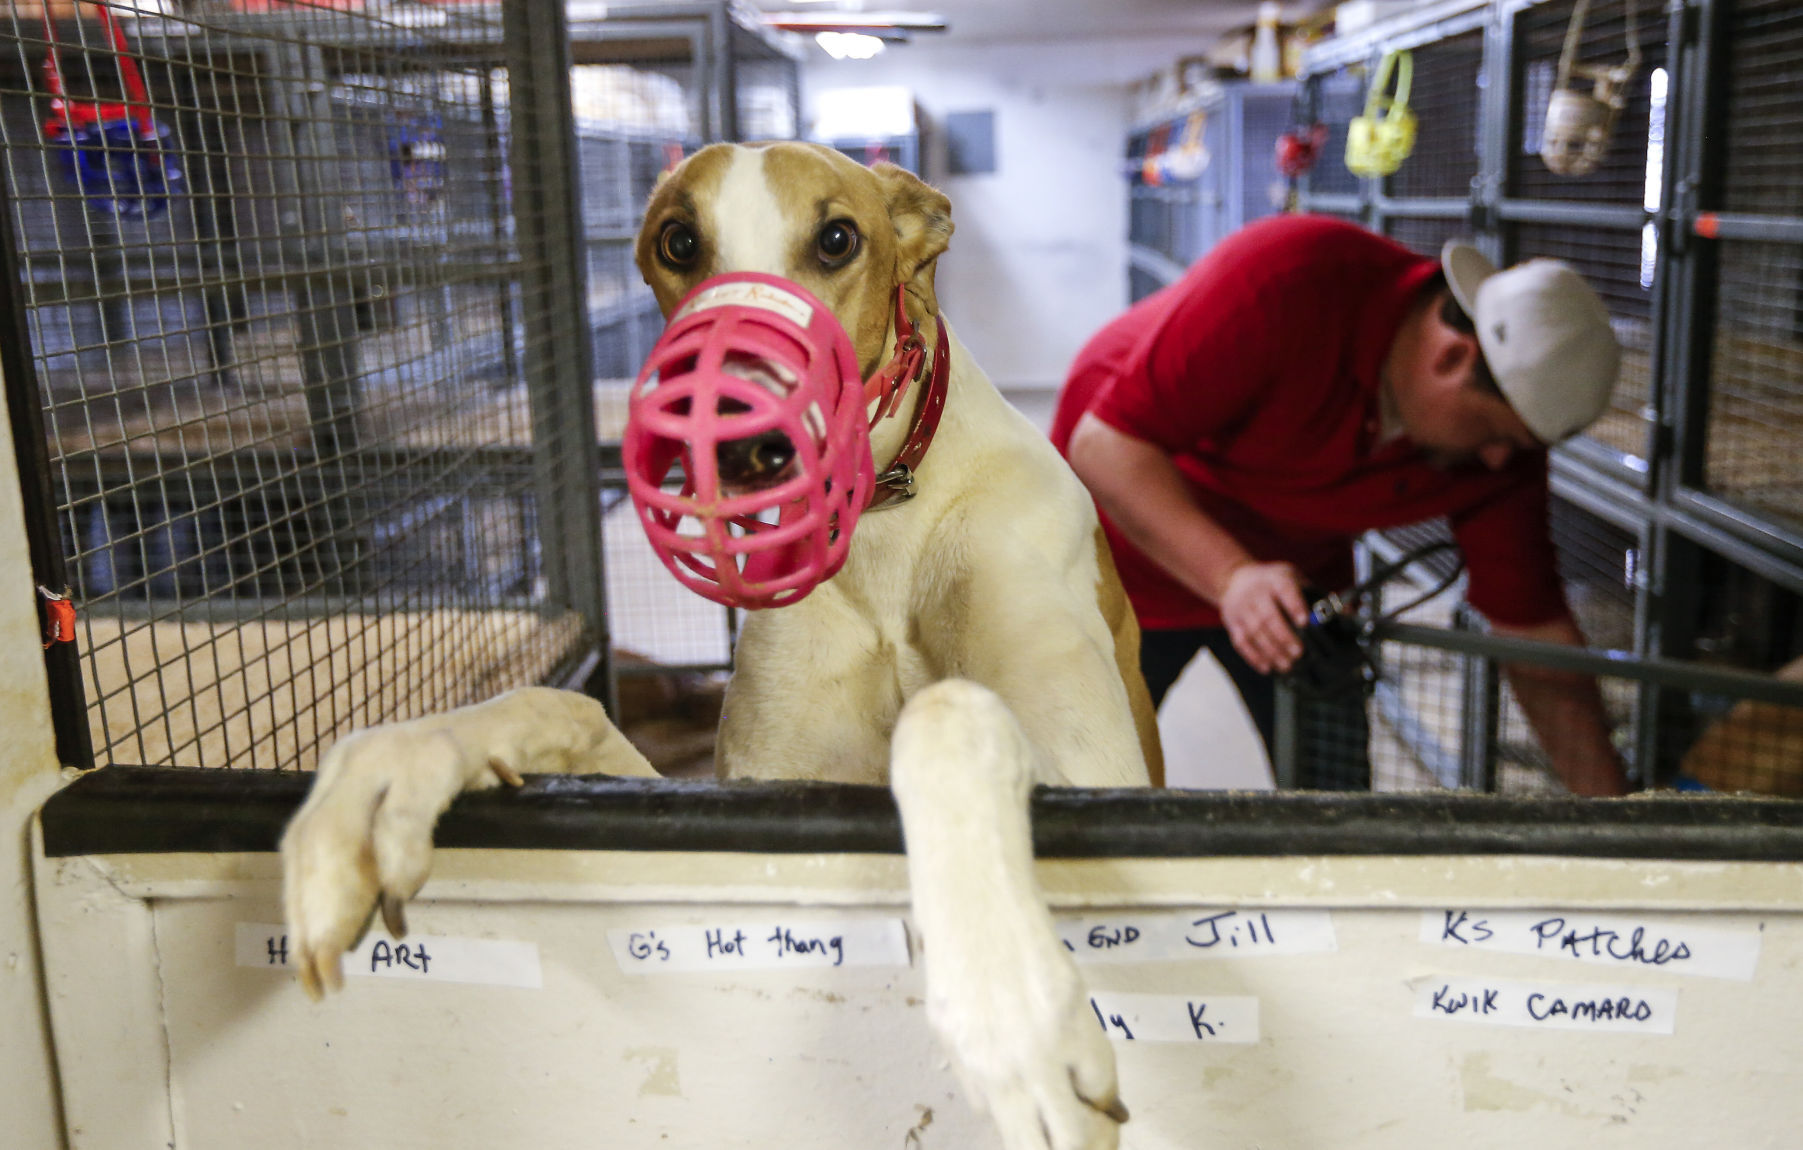 One of the greyhounds, Neon, pokes his nose at the camera before going outside on Tuesday. Neon races with the Copper Kettle Kennel at Iowa Greyhound Park.    PHOTO CREDIT: Dave Kettering